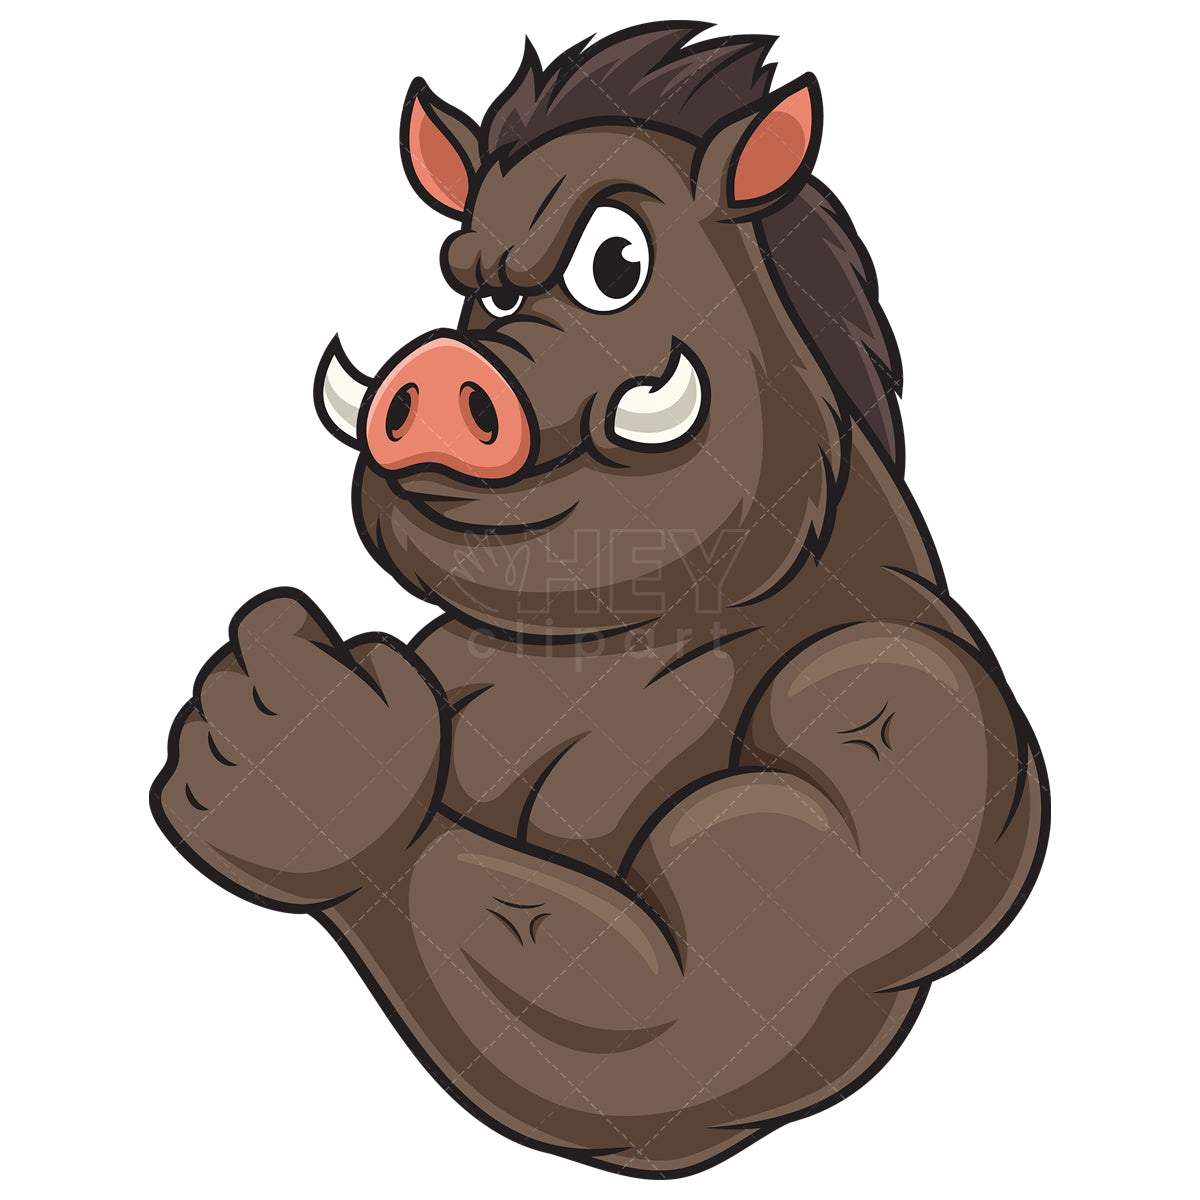 Royalty-free stock vector illustration of a muscular wild boar mascot.